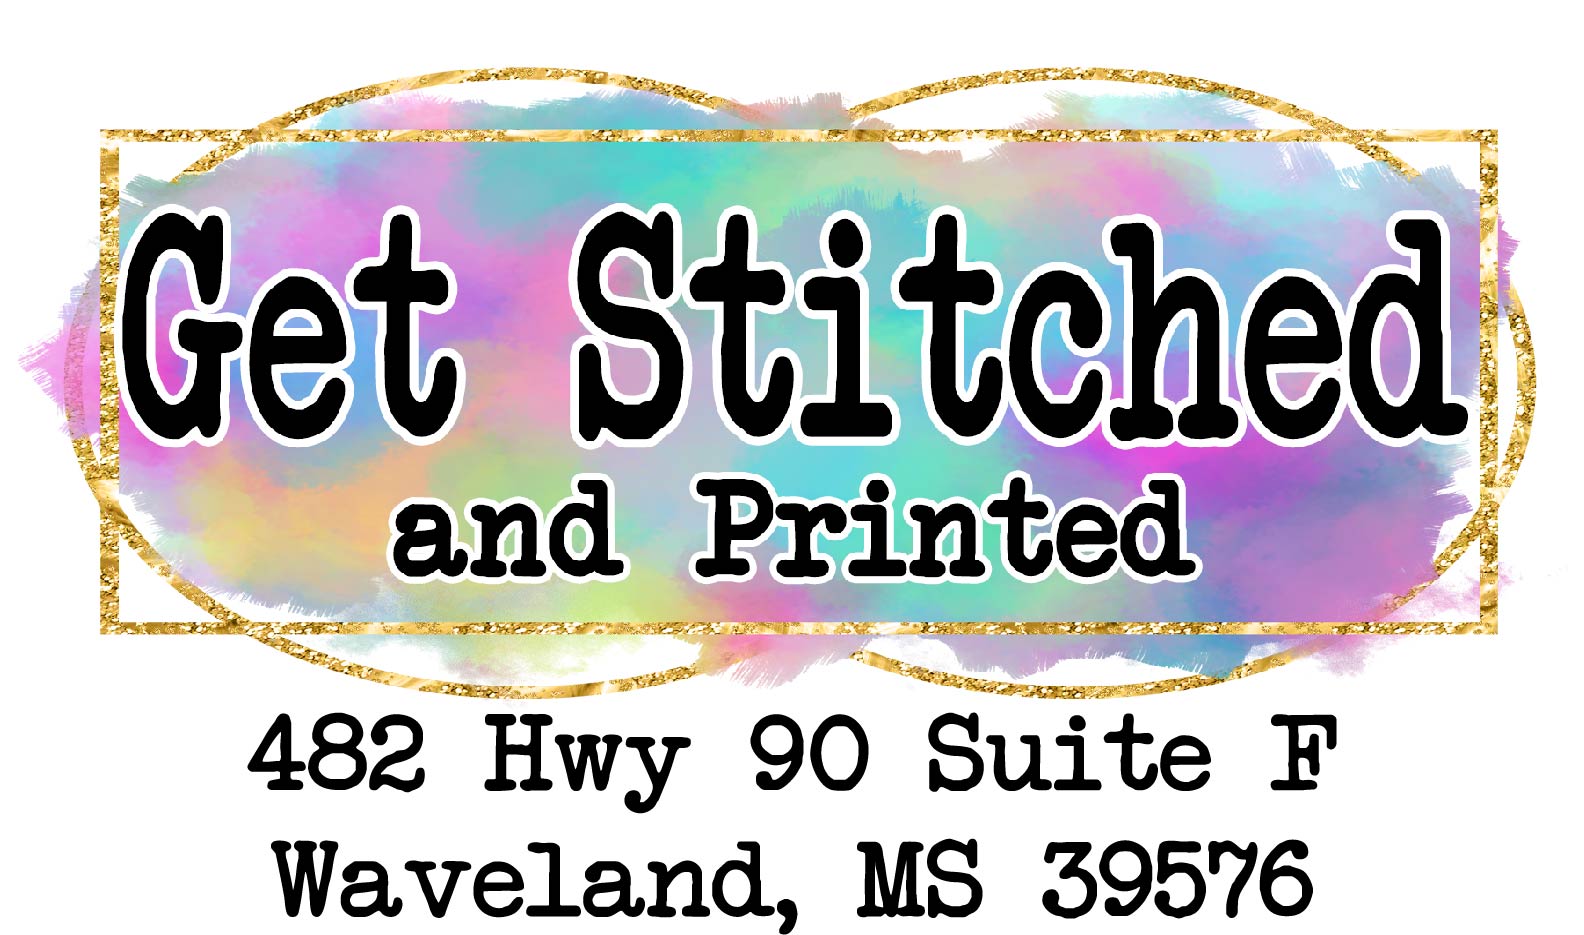 Get Stitched and Printed